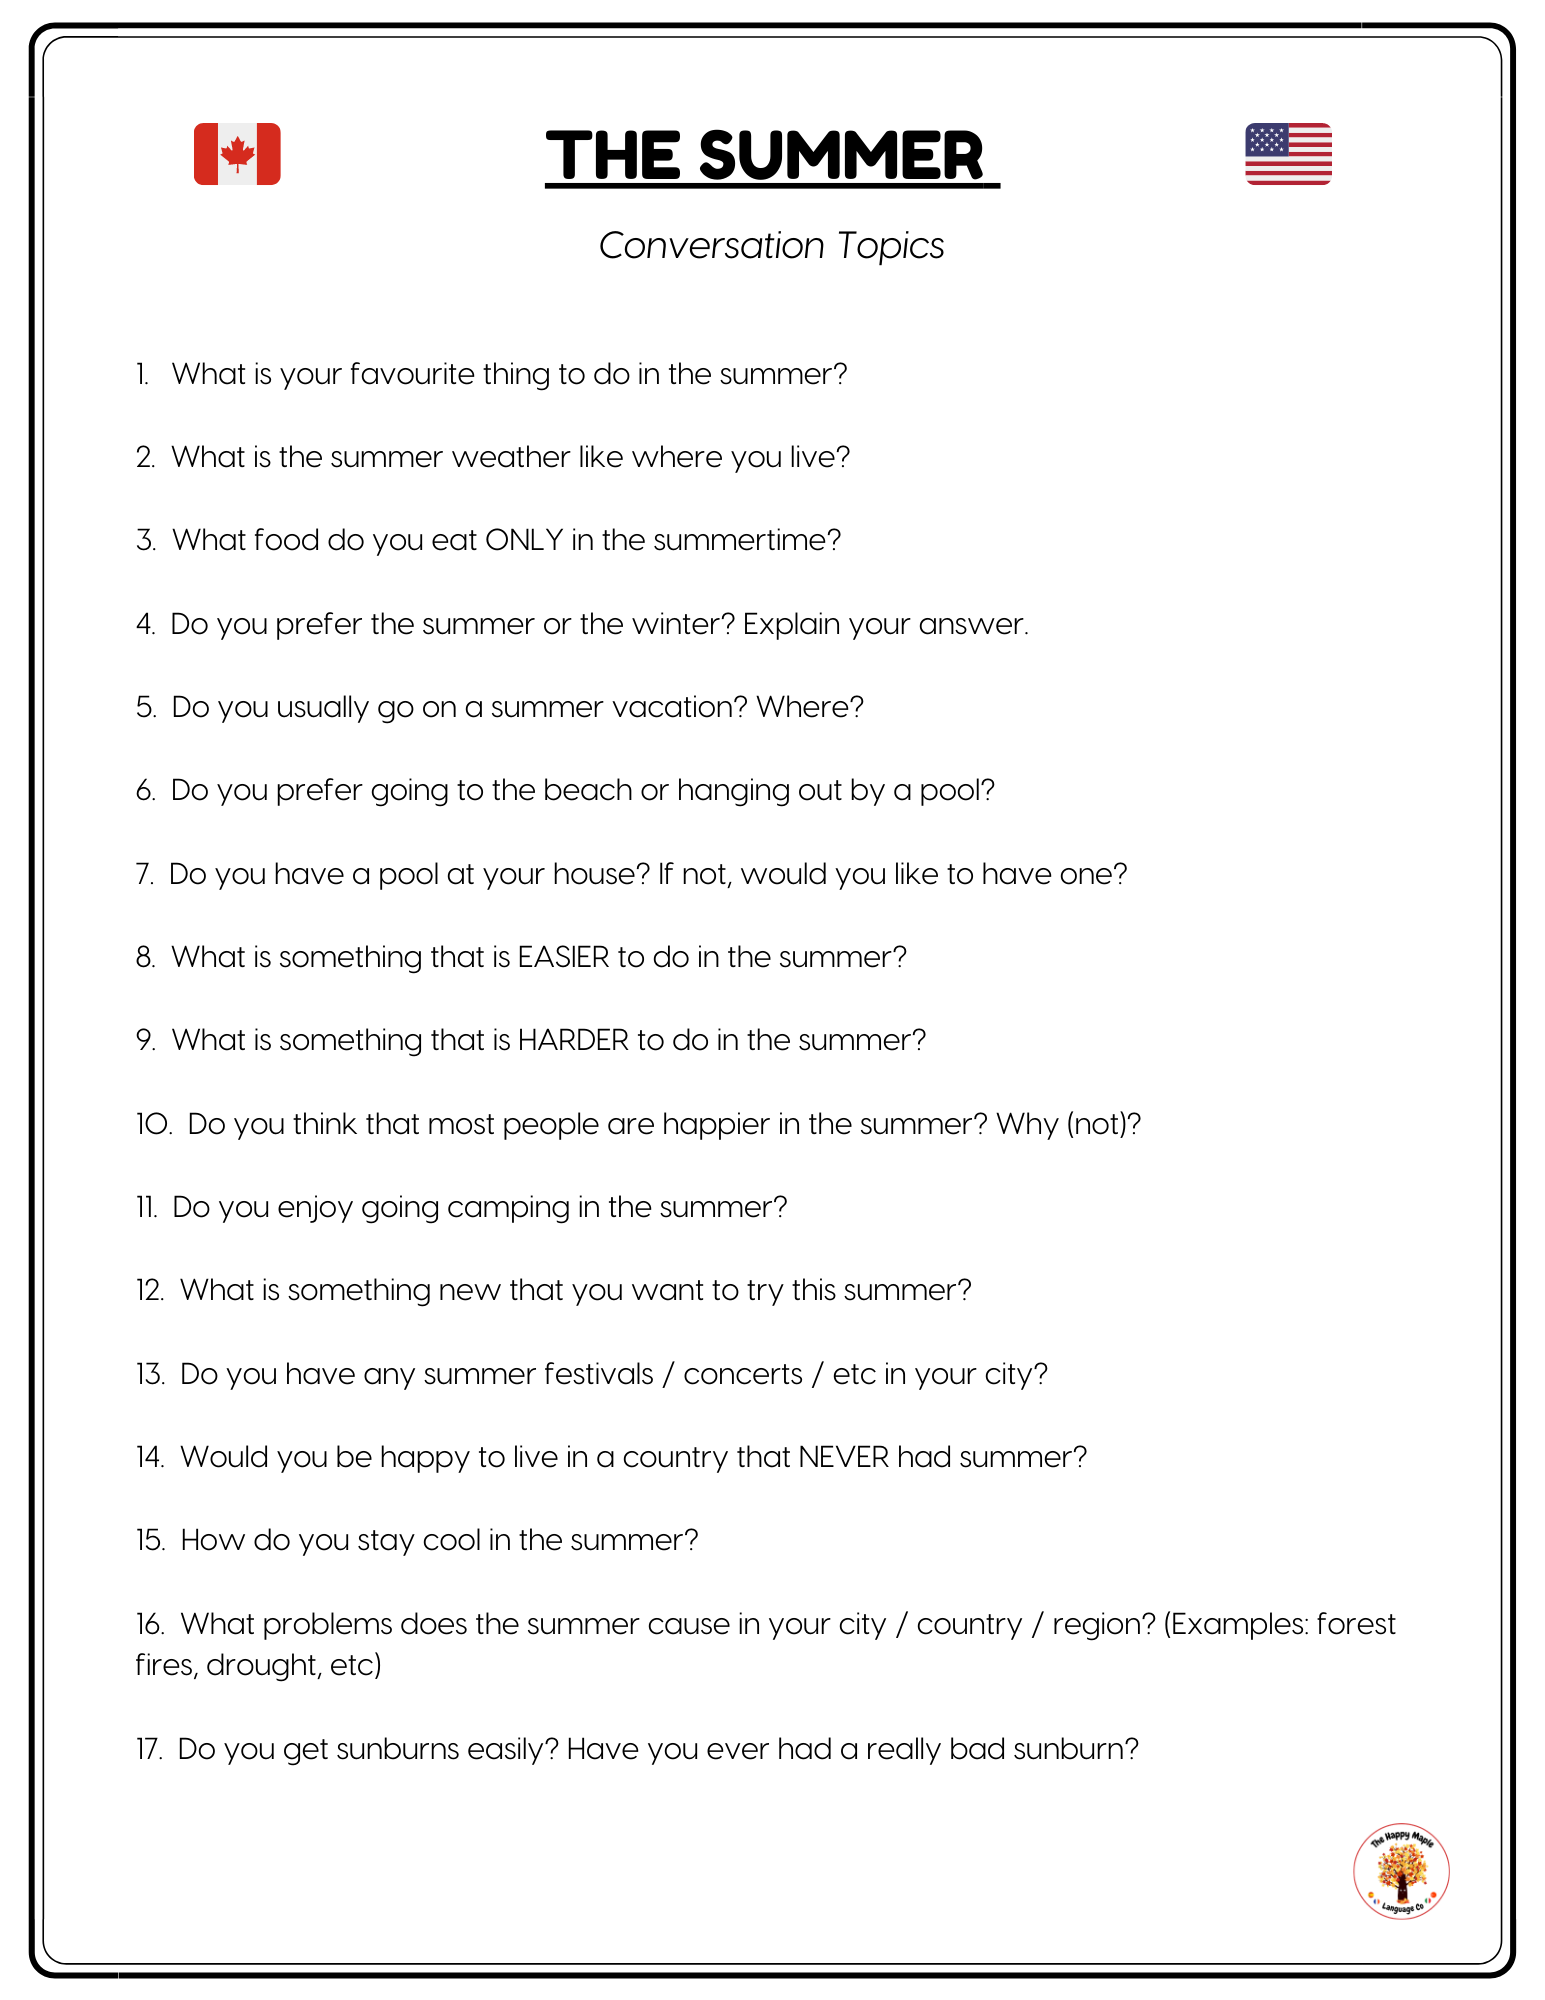 English ESL Discussion Questions about the Summer - Free PDF Printable Download